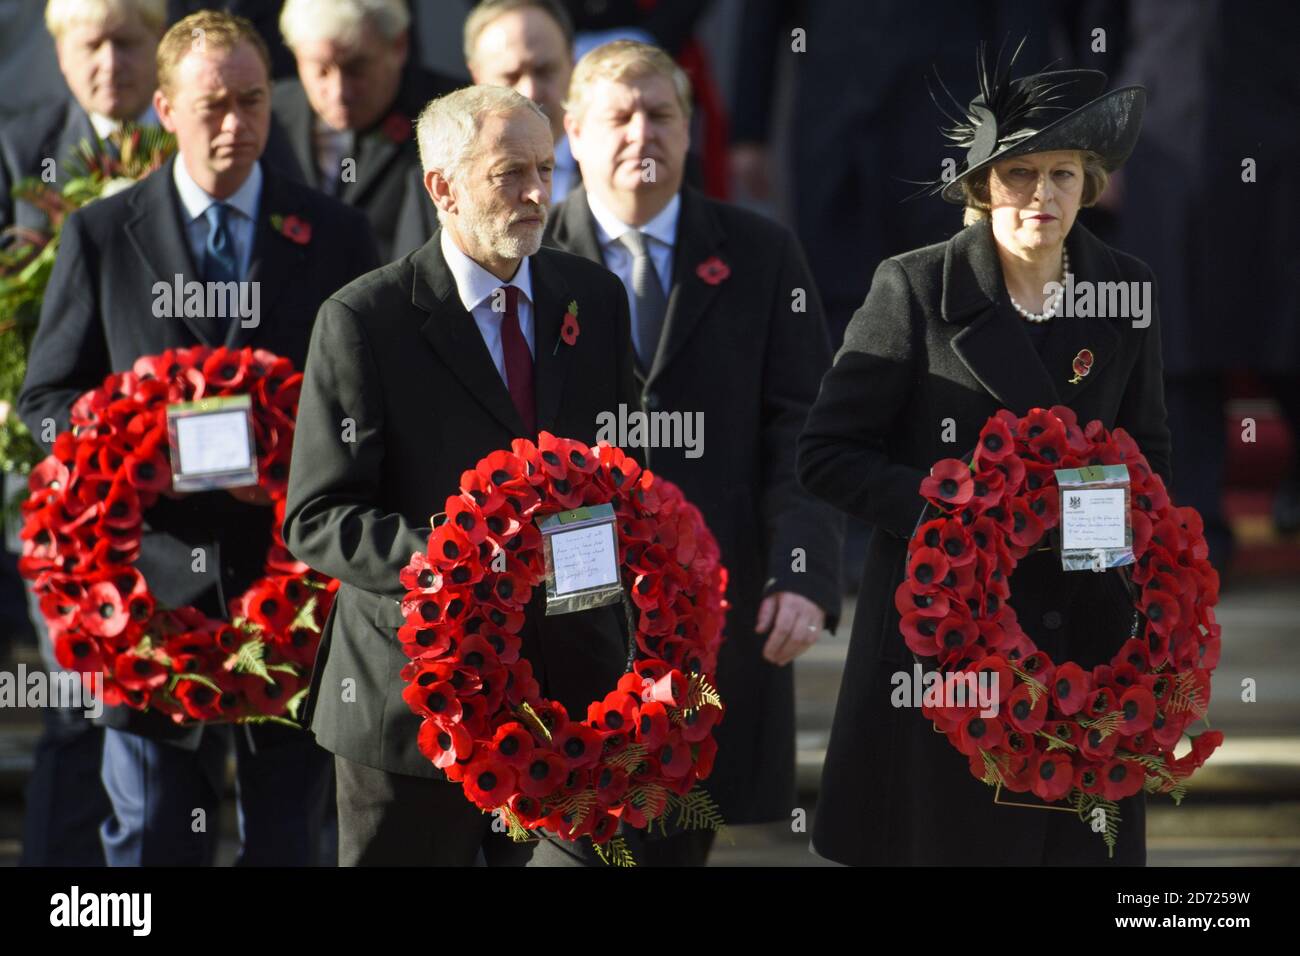 Labour leader Jeremy Corbyn, Prime Minister Theresa May and Liberal Democrat leader Tim Farron during the annual Remembrance Sunday Service at the Cenotaph memorial in Whitehall, central London, held in tribute for members of the armed forces who have died in major conflicts. Picture date: Sunday November 13th, 2016. Photo credit should read: Matt Crossick/ EMPICS Entertainment. Stock Photo